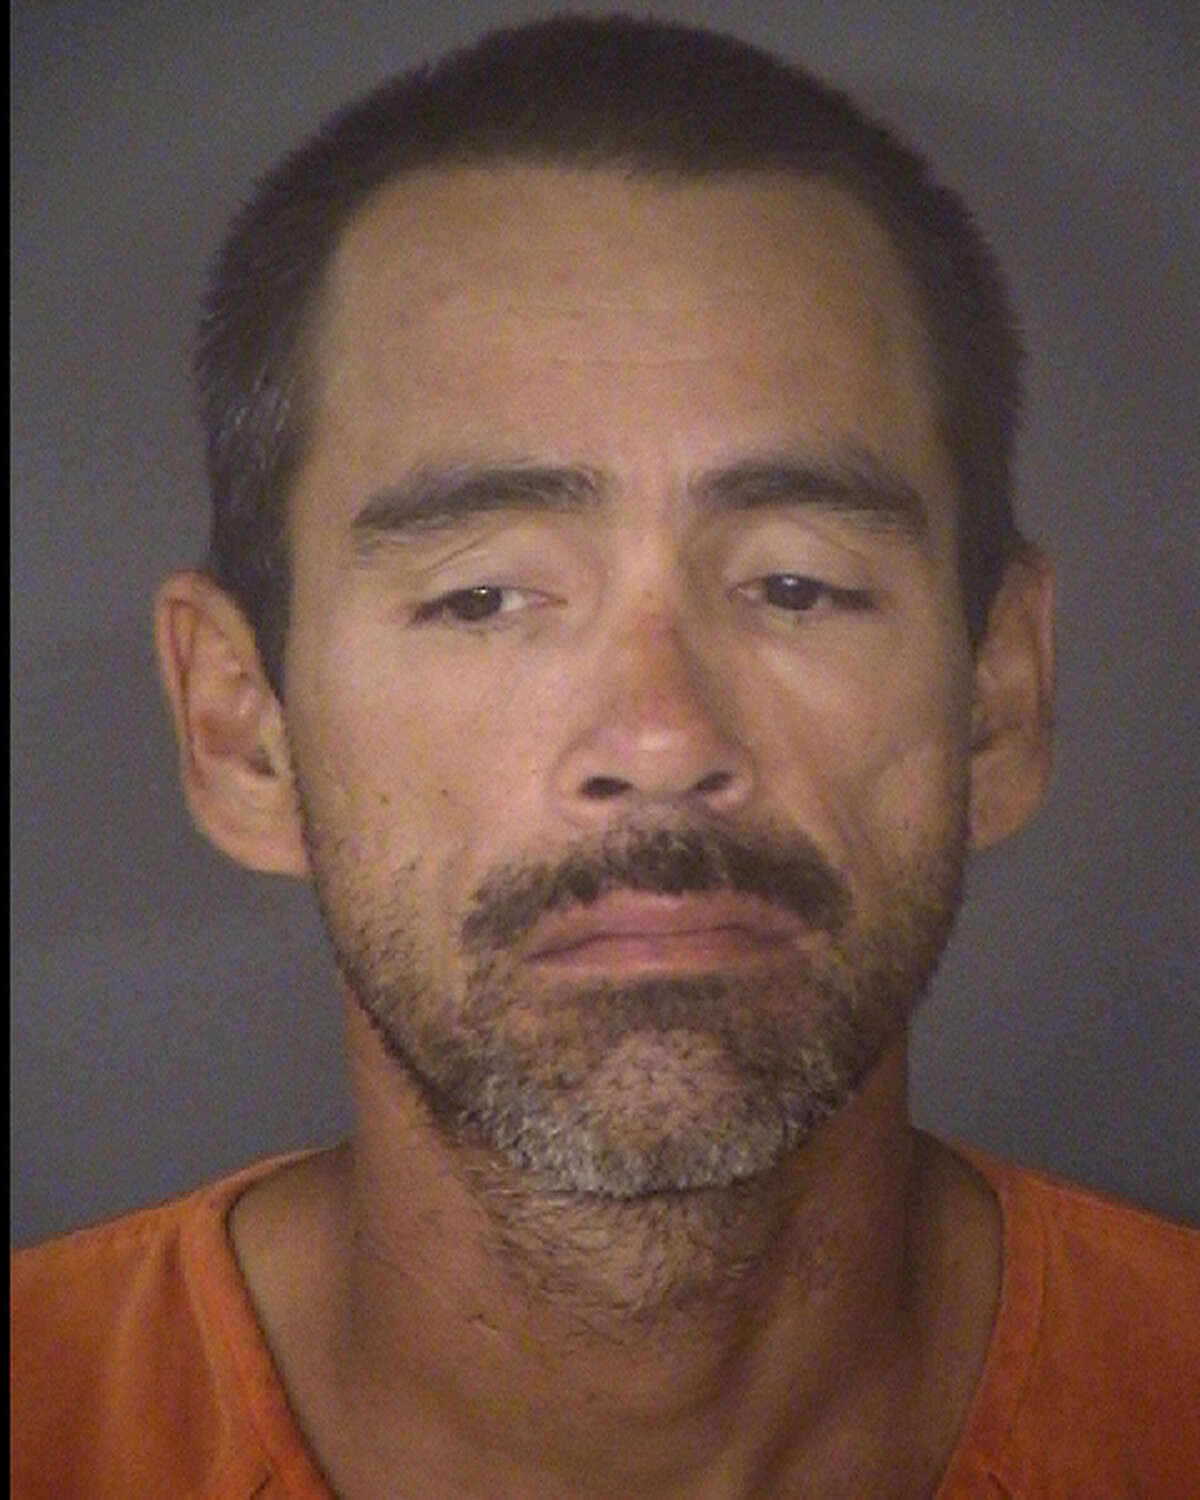 George Meyer Jr., 43, is now facing a charge of aggravated sexual assault of a child. He was booked into the Bexar County Jail on a $150,000 bond.